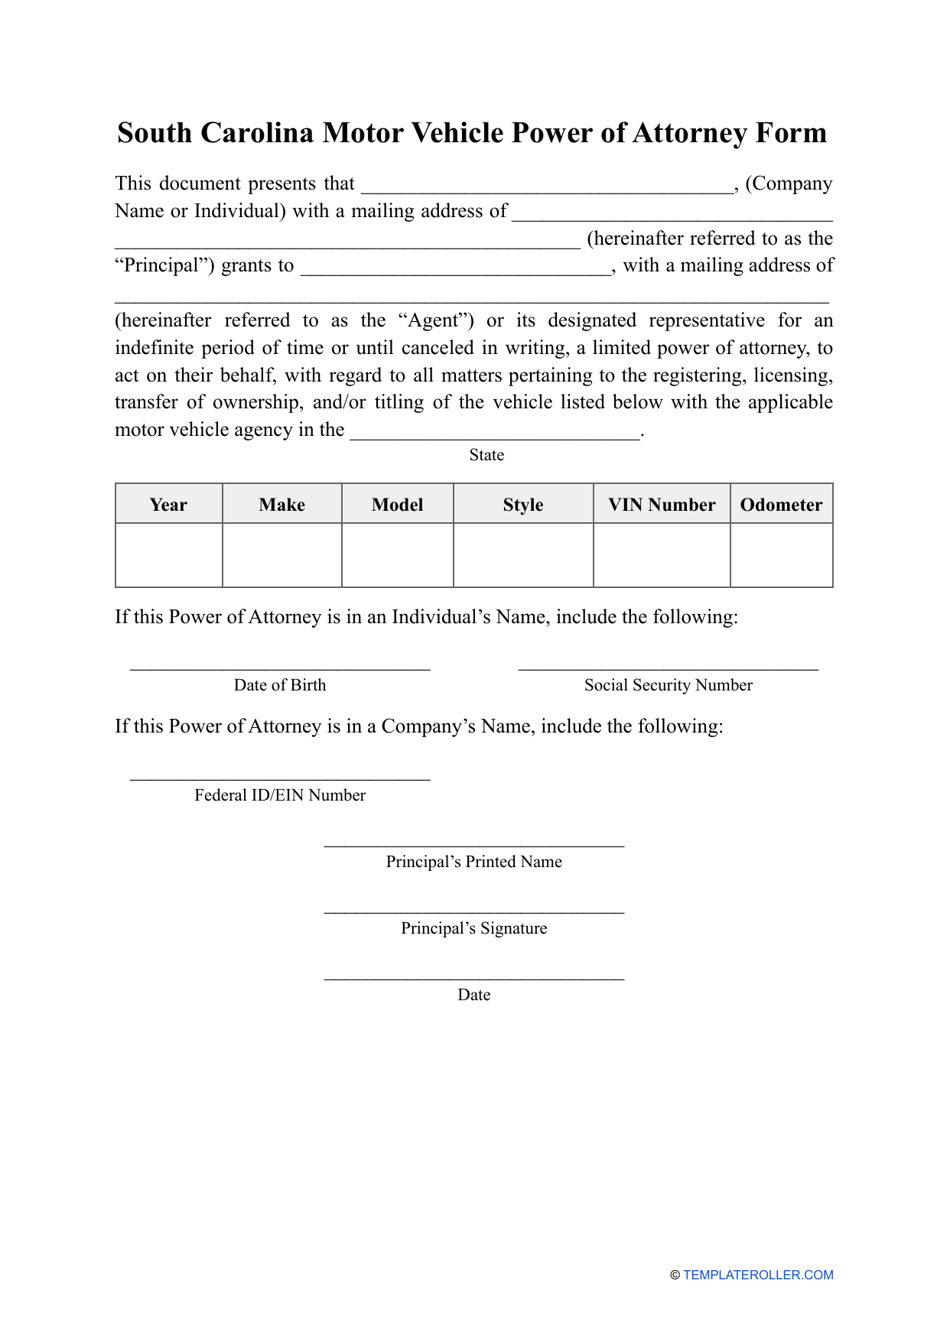 Motor Vehicle Power of Attorney Form - South Carolina, Page 1